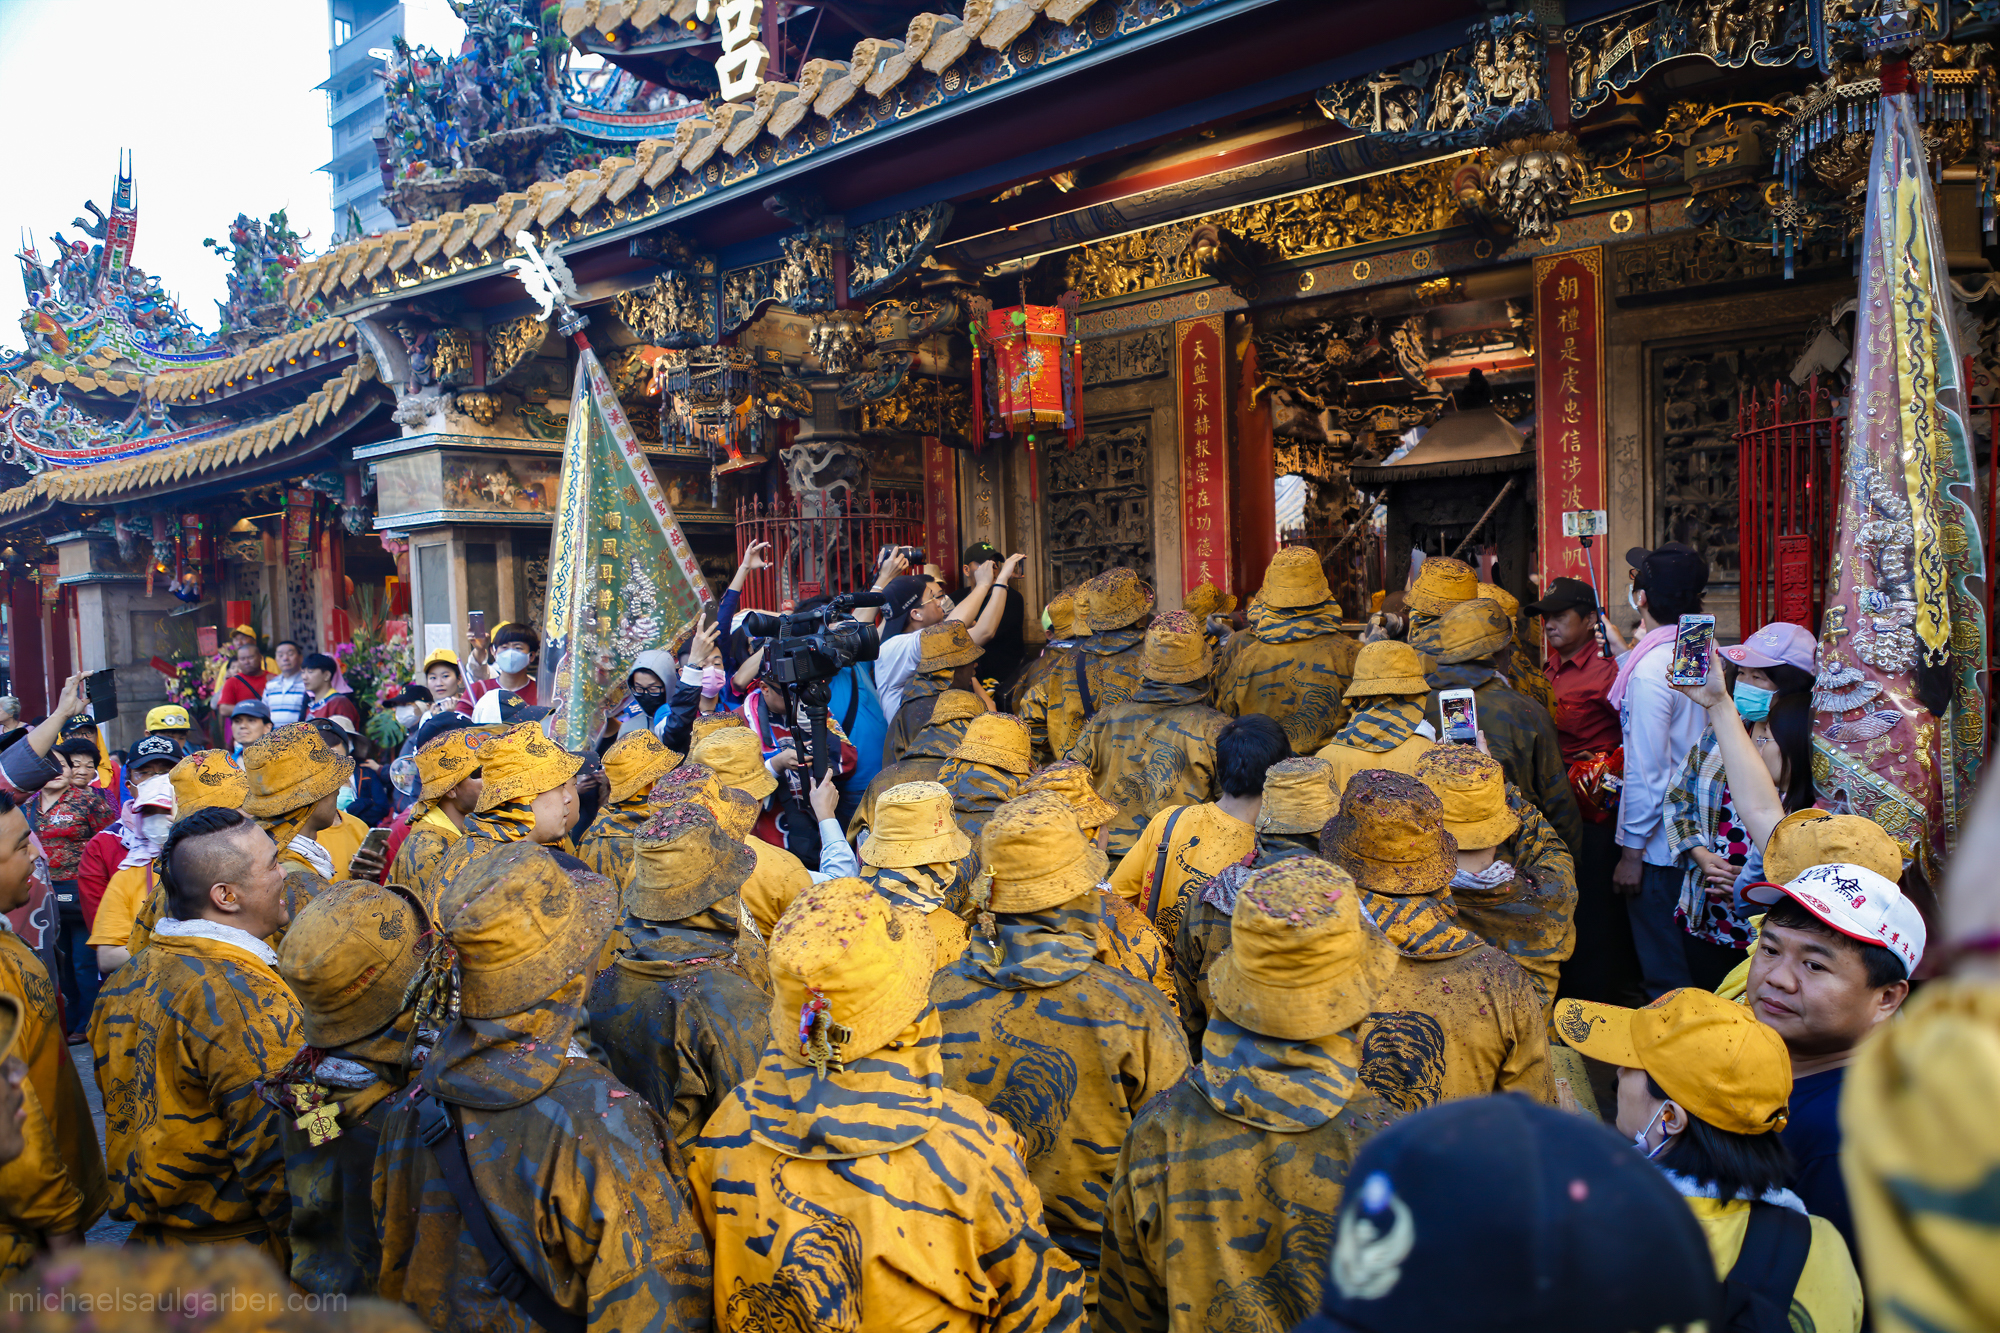 The tiger gods' palanquin enters the the temple, Beigang Chaotian Temple, 2017